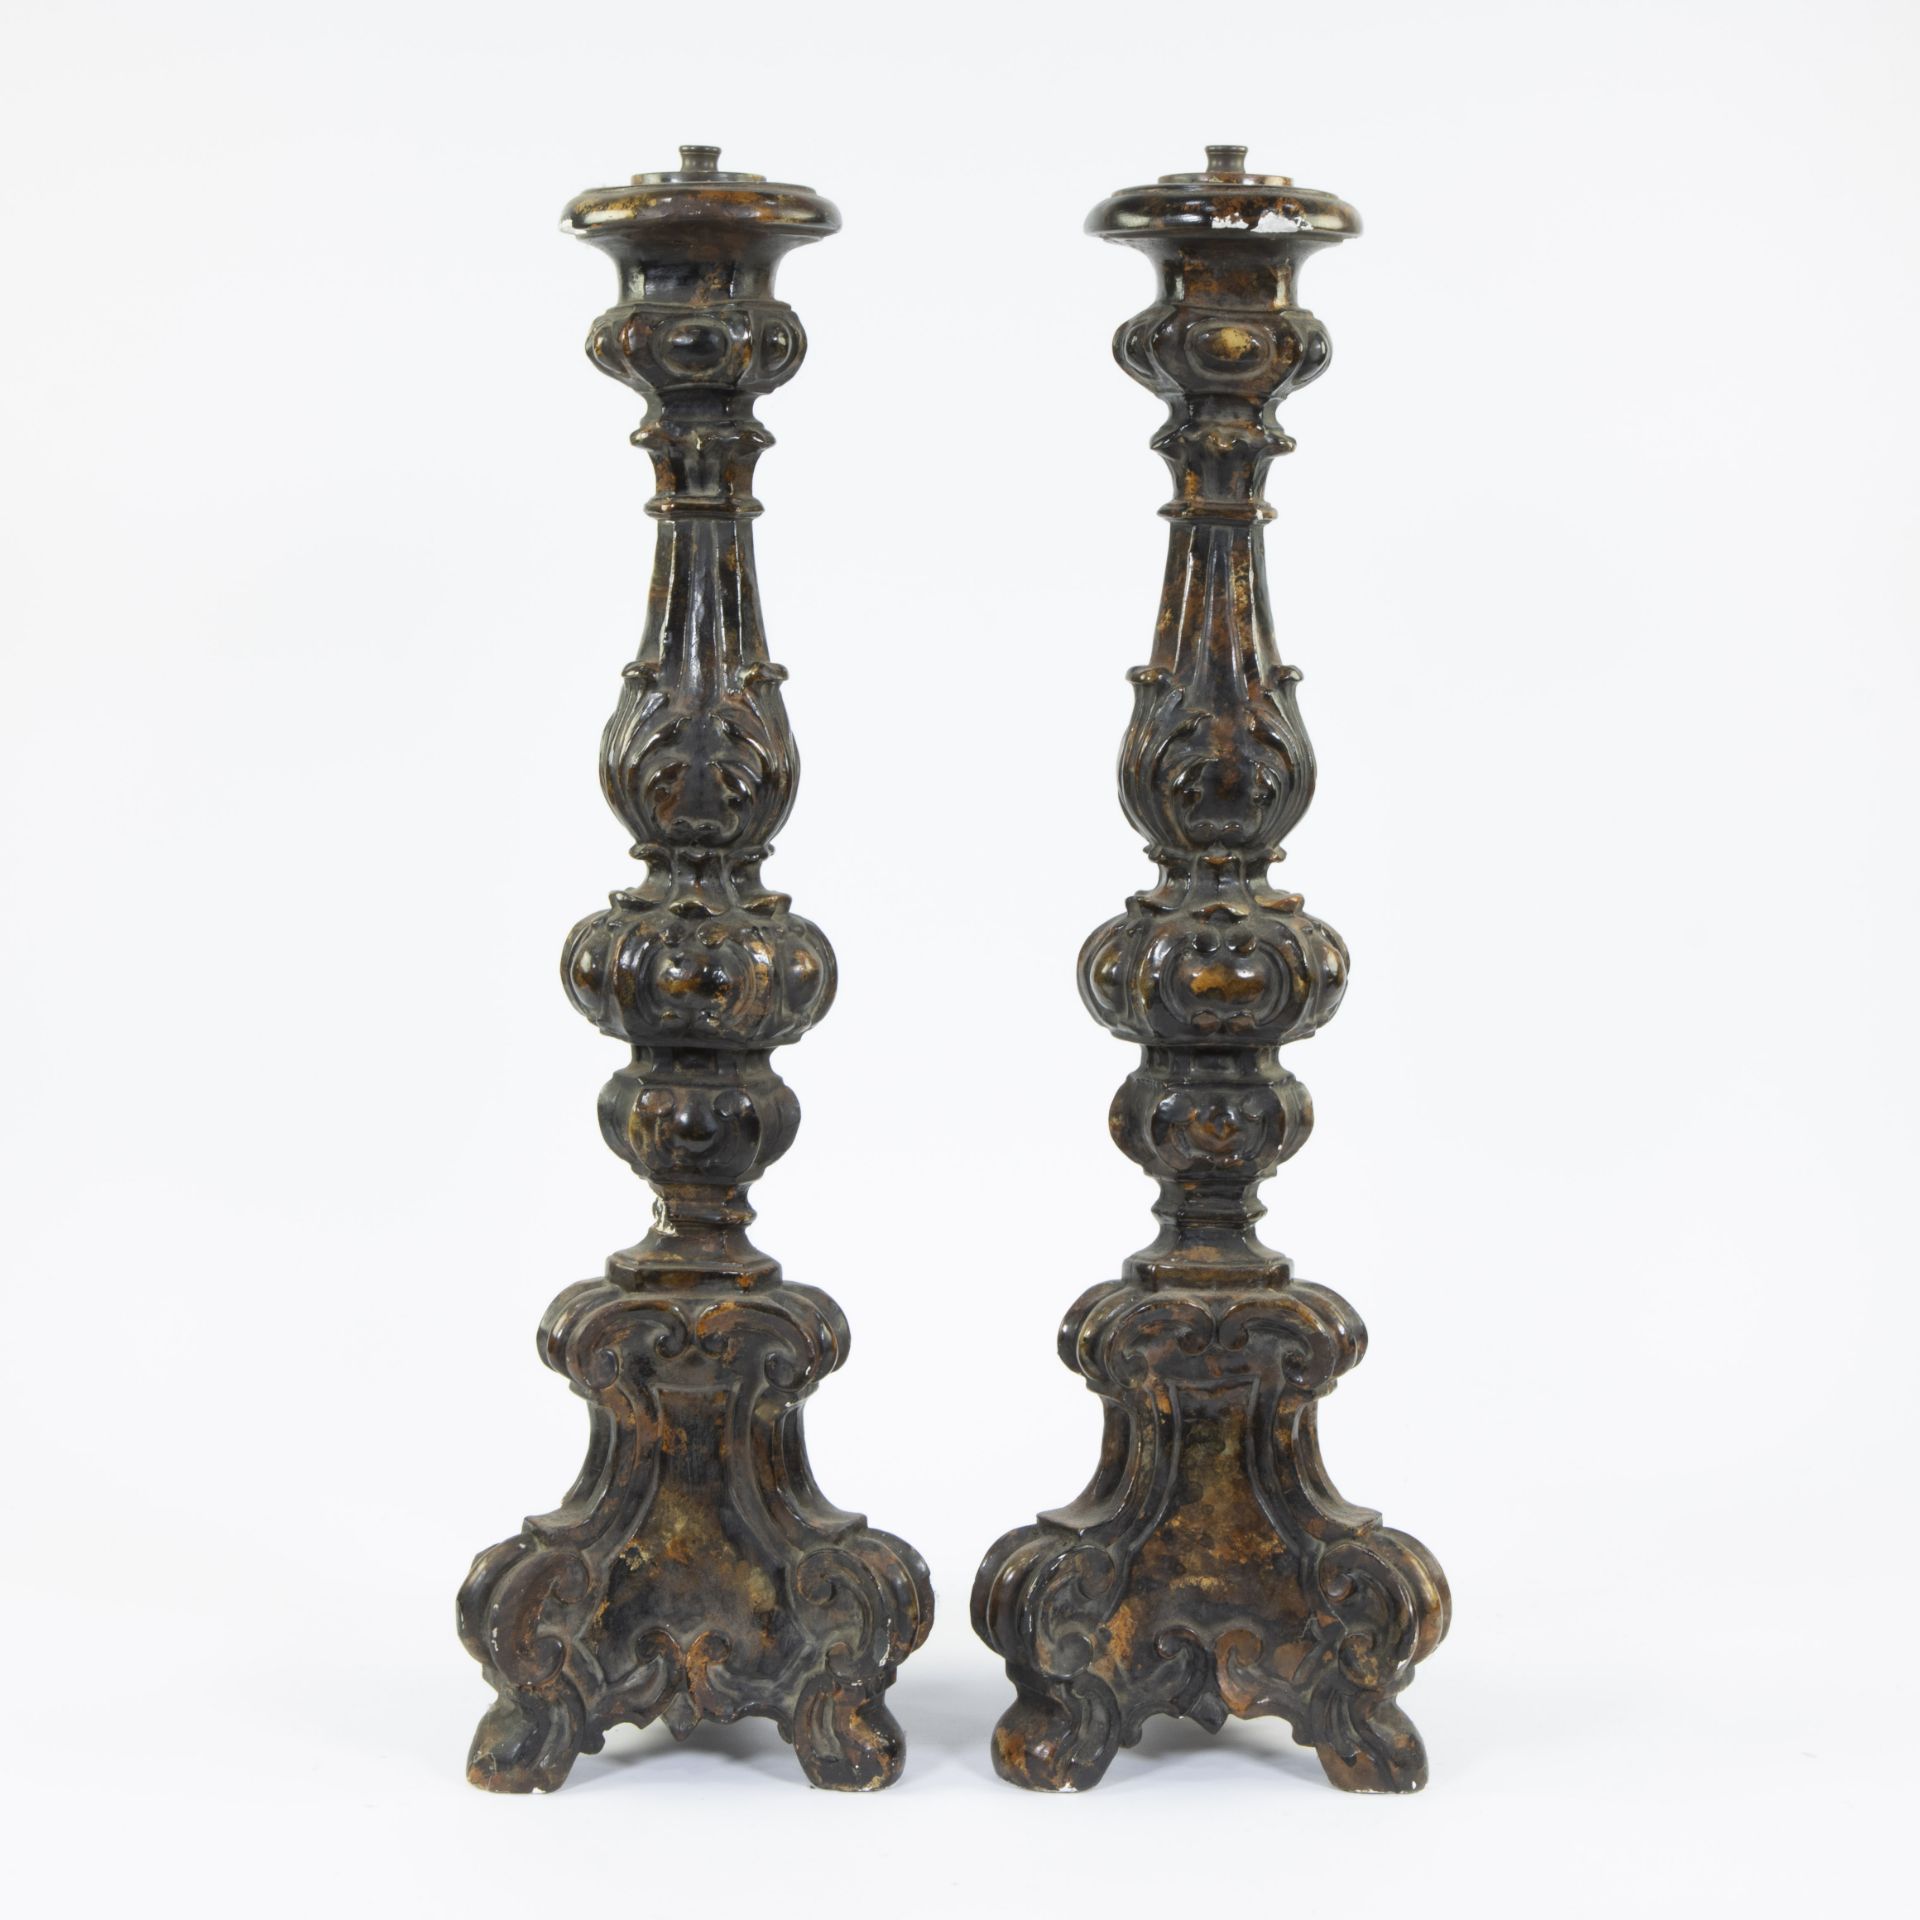 Wooden candlesticks 18th century with traces of polychromy converted to lampadaire